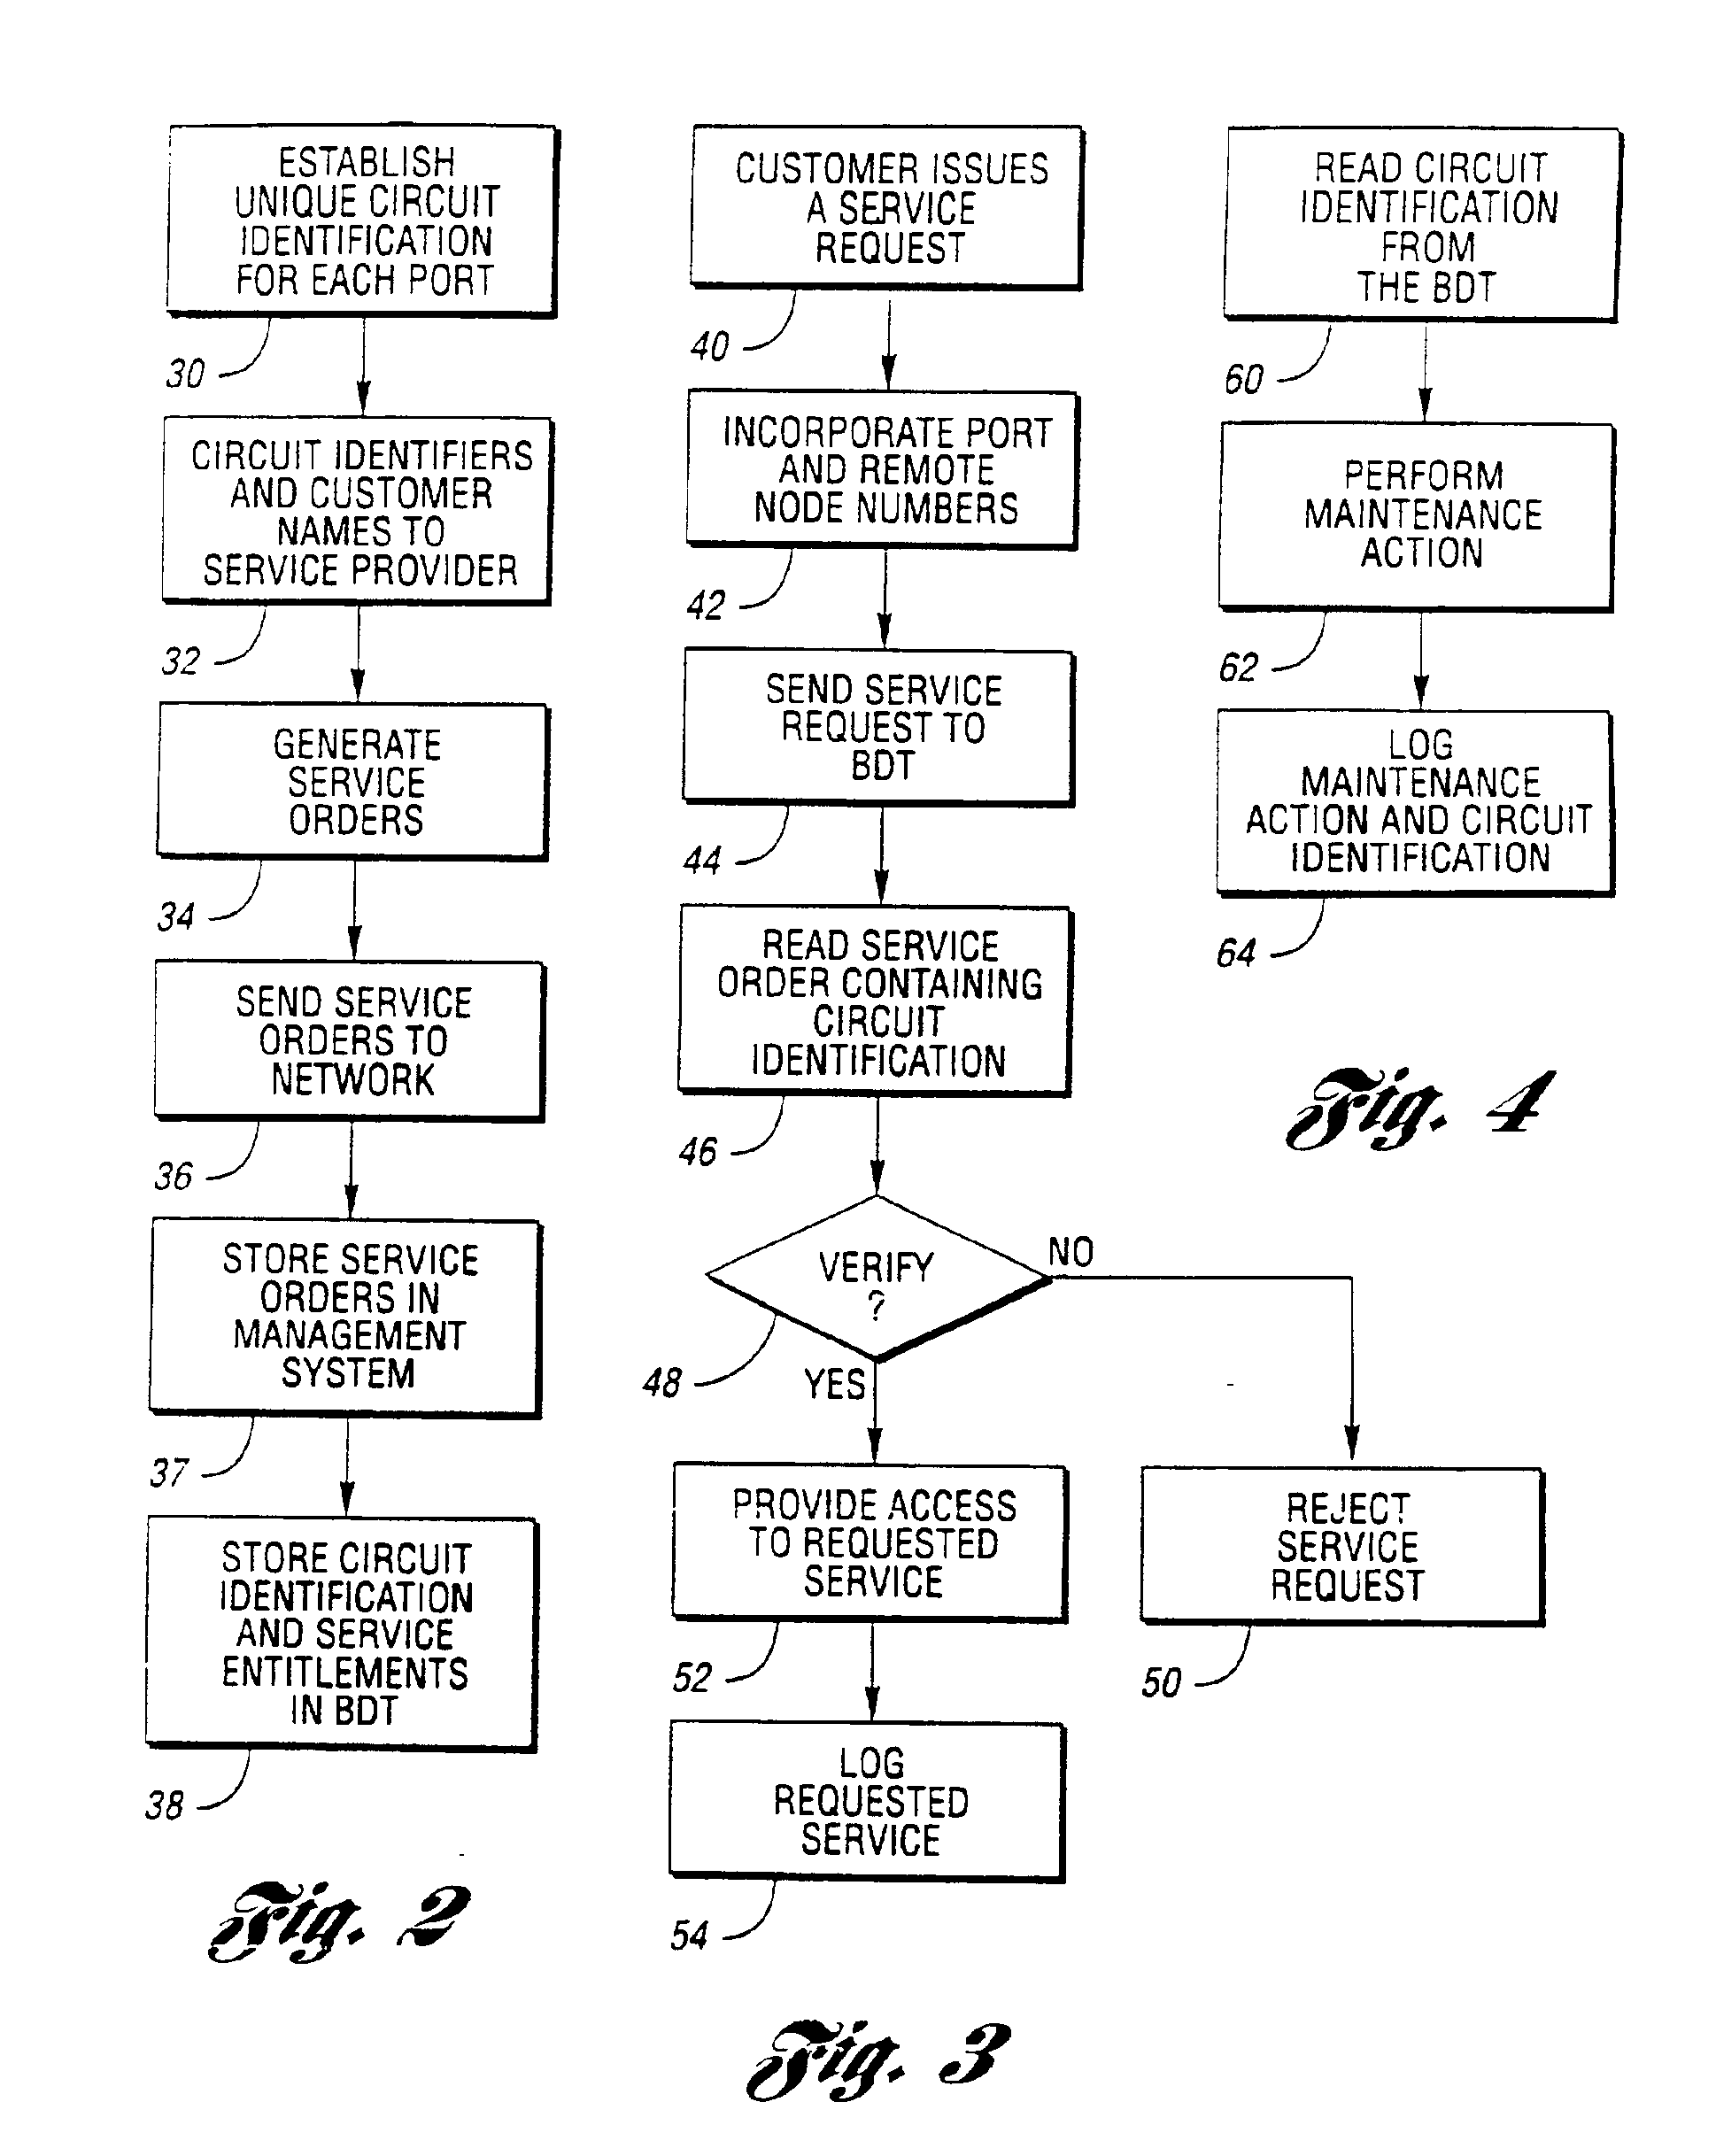 Broadband circuit identification method for controlling service access